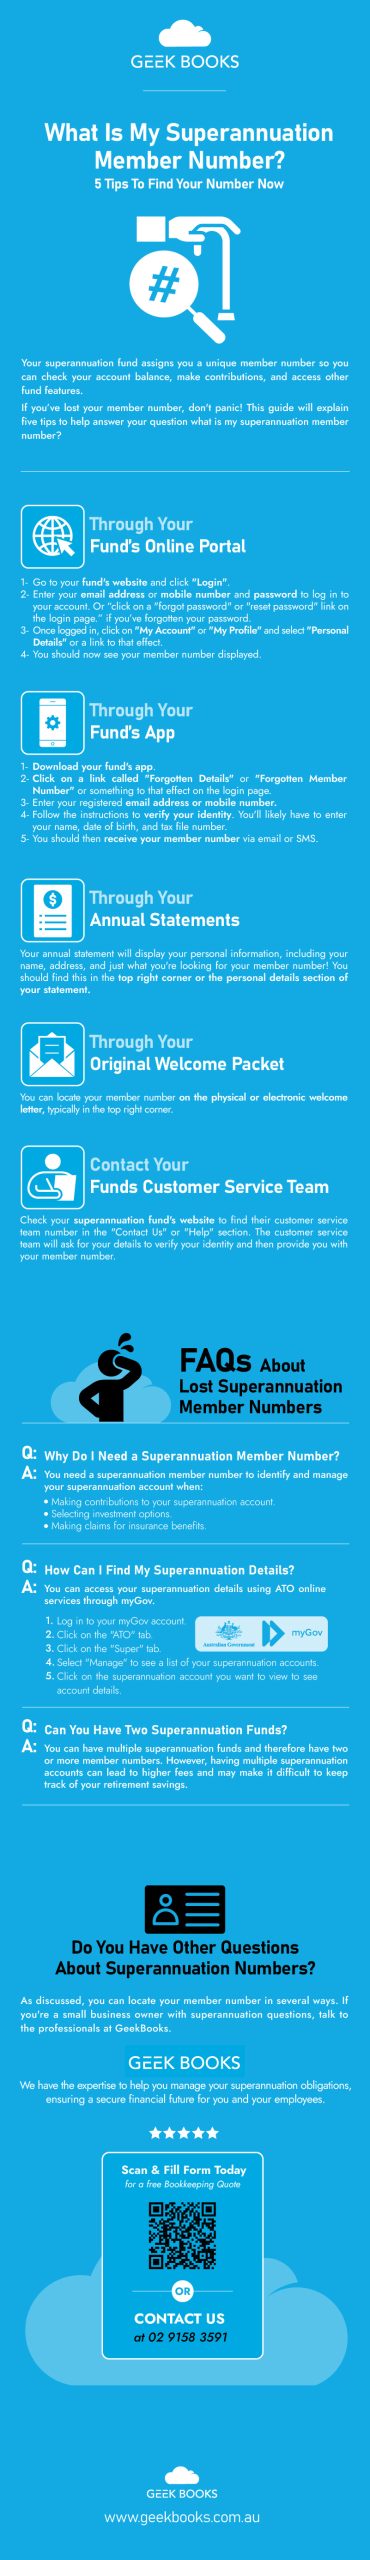 What Is My Superannuation Member Number Infographic